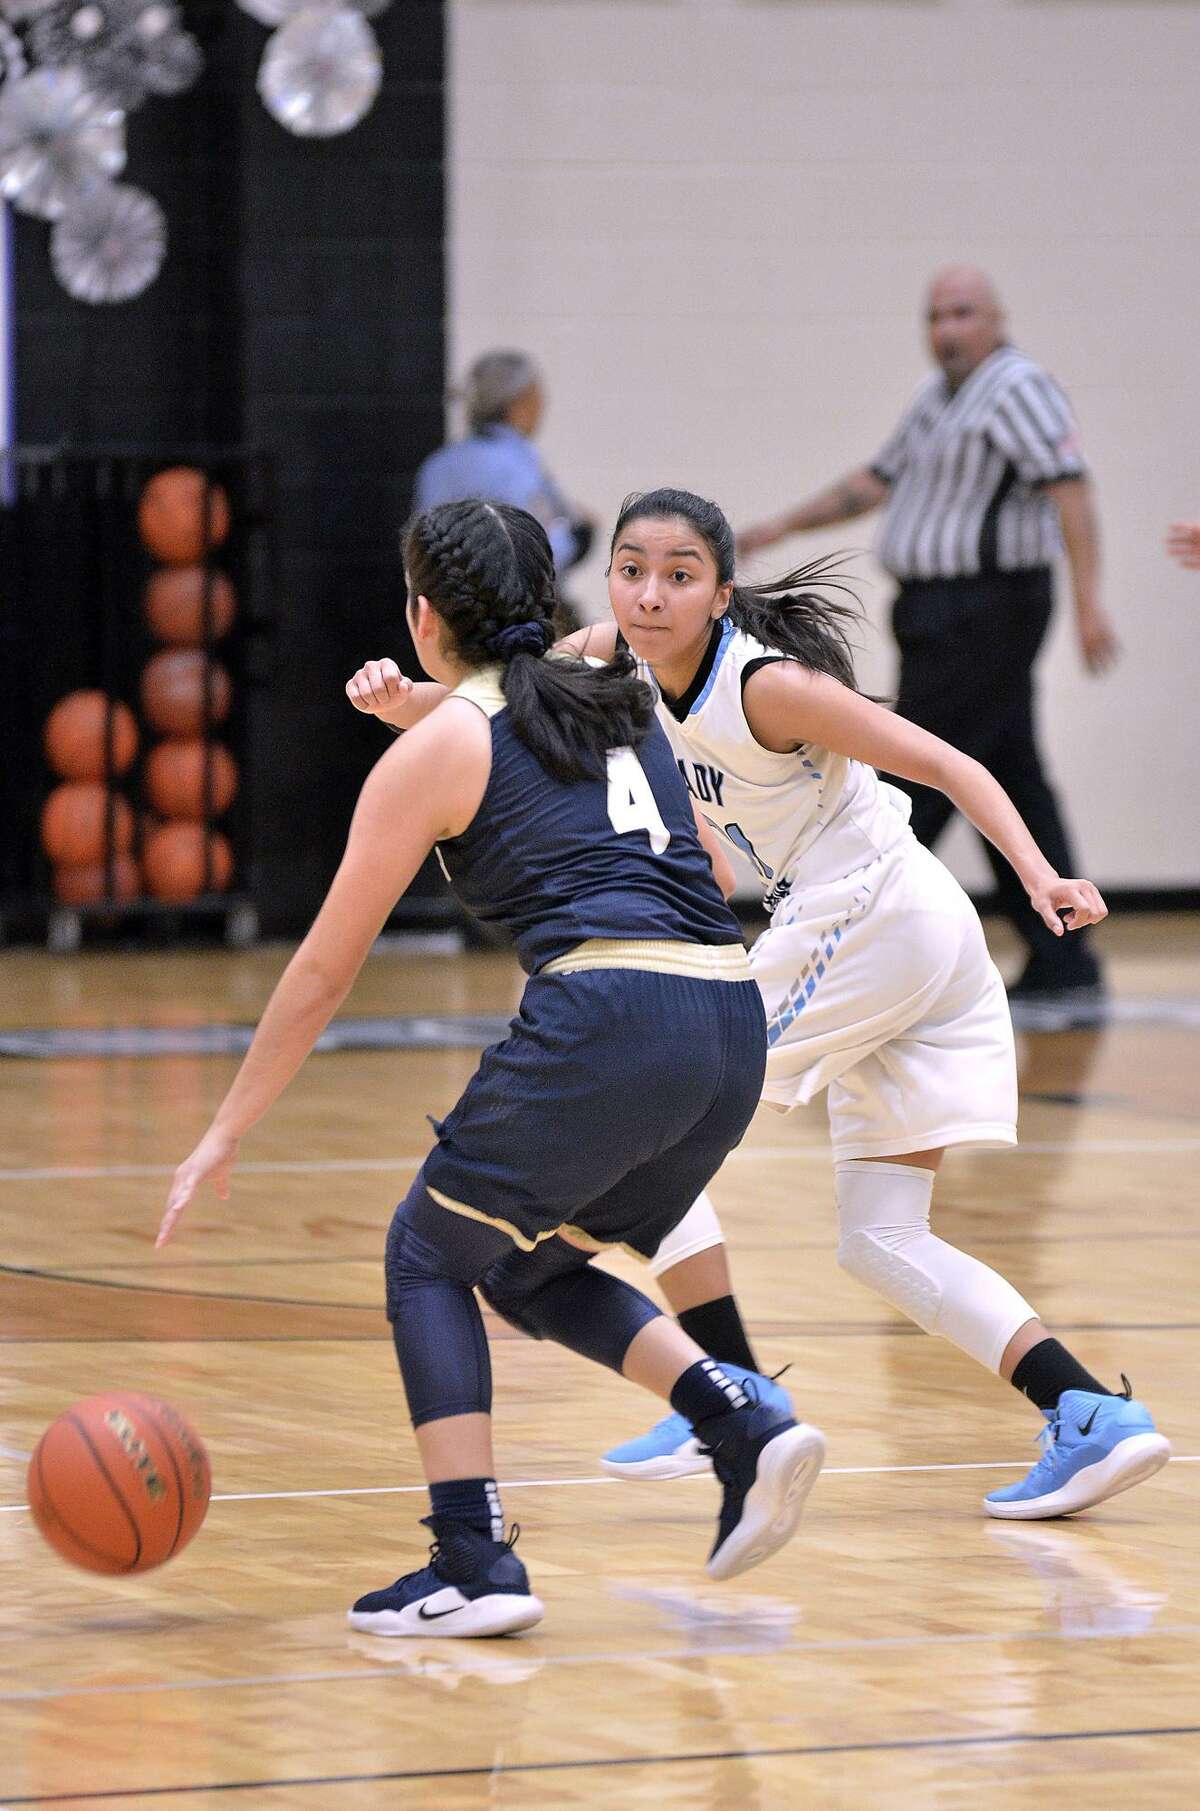 Lori Arizola and United South picked up a 66-37 victory over Alexander on Tuesday night in a early-season UISD showdown.